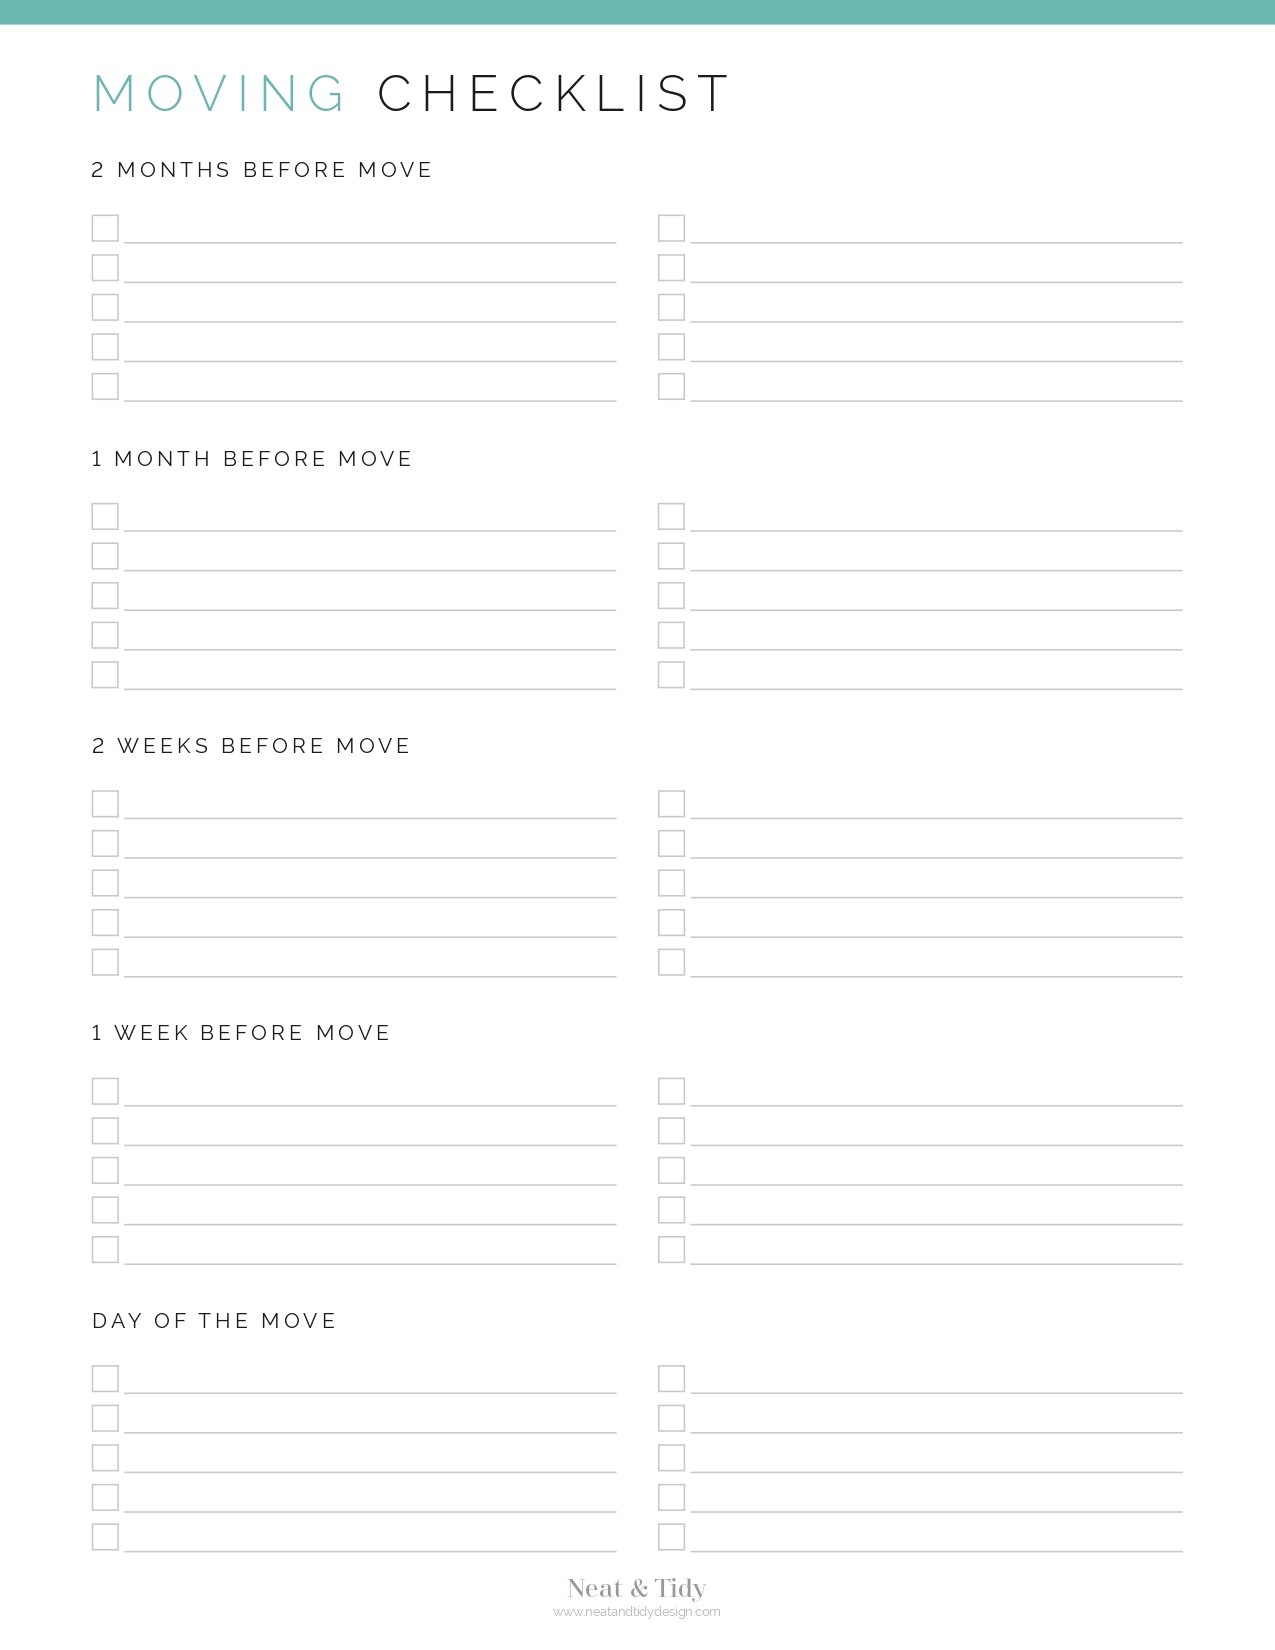 moving-checklist-neat-and-tidy-design